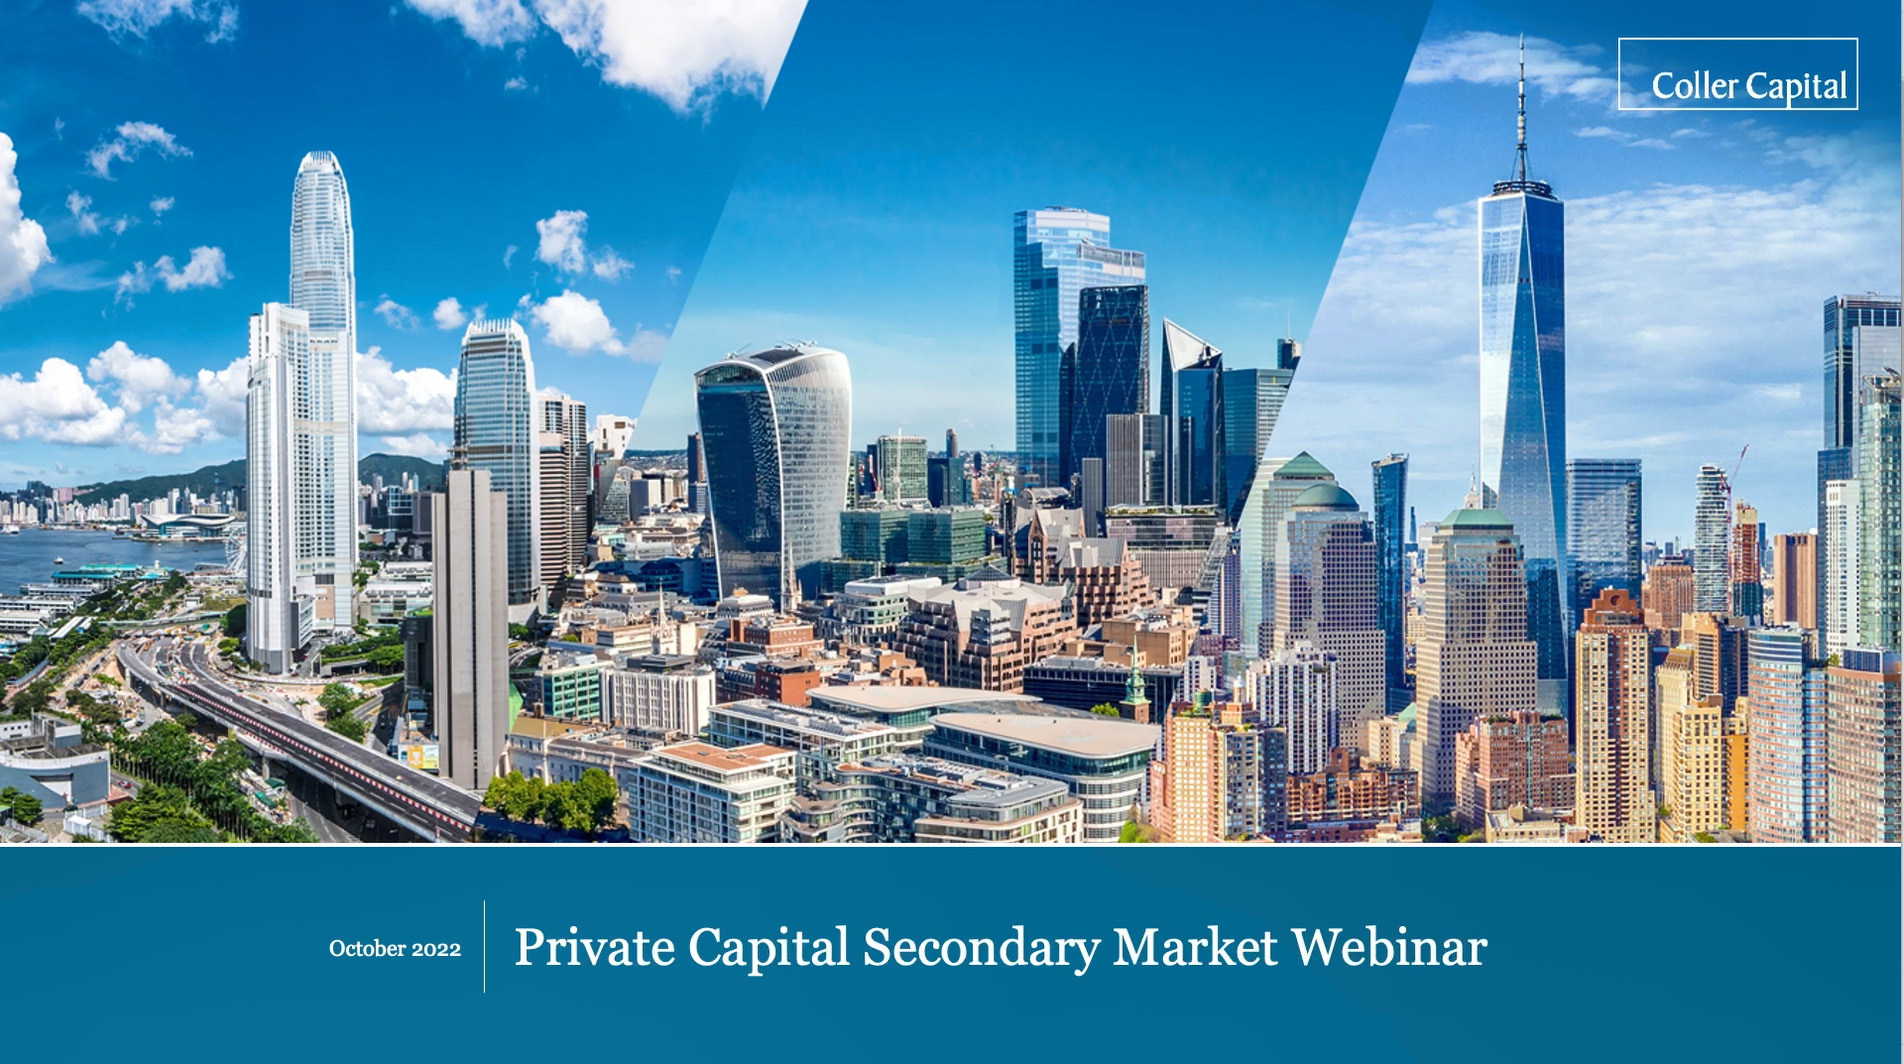 Private Markets Insights: Dynamics in the private capital secondary market